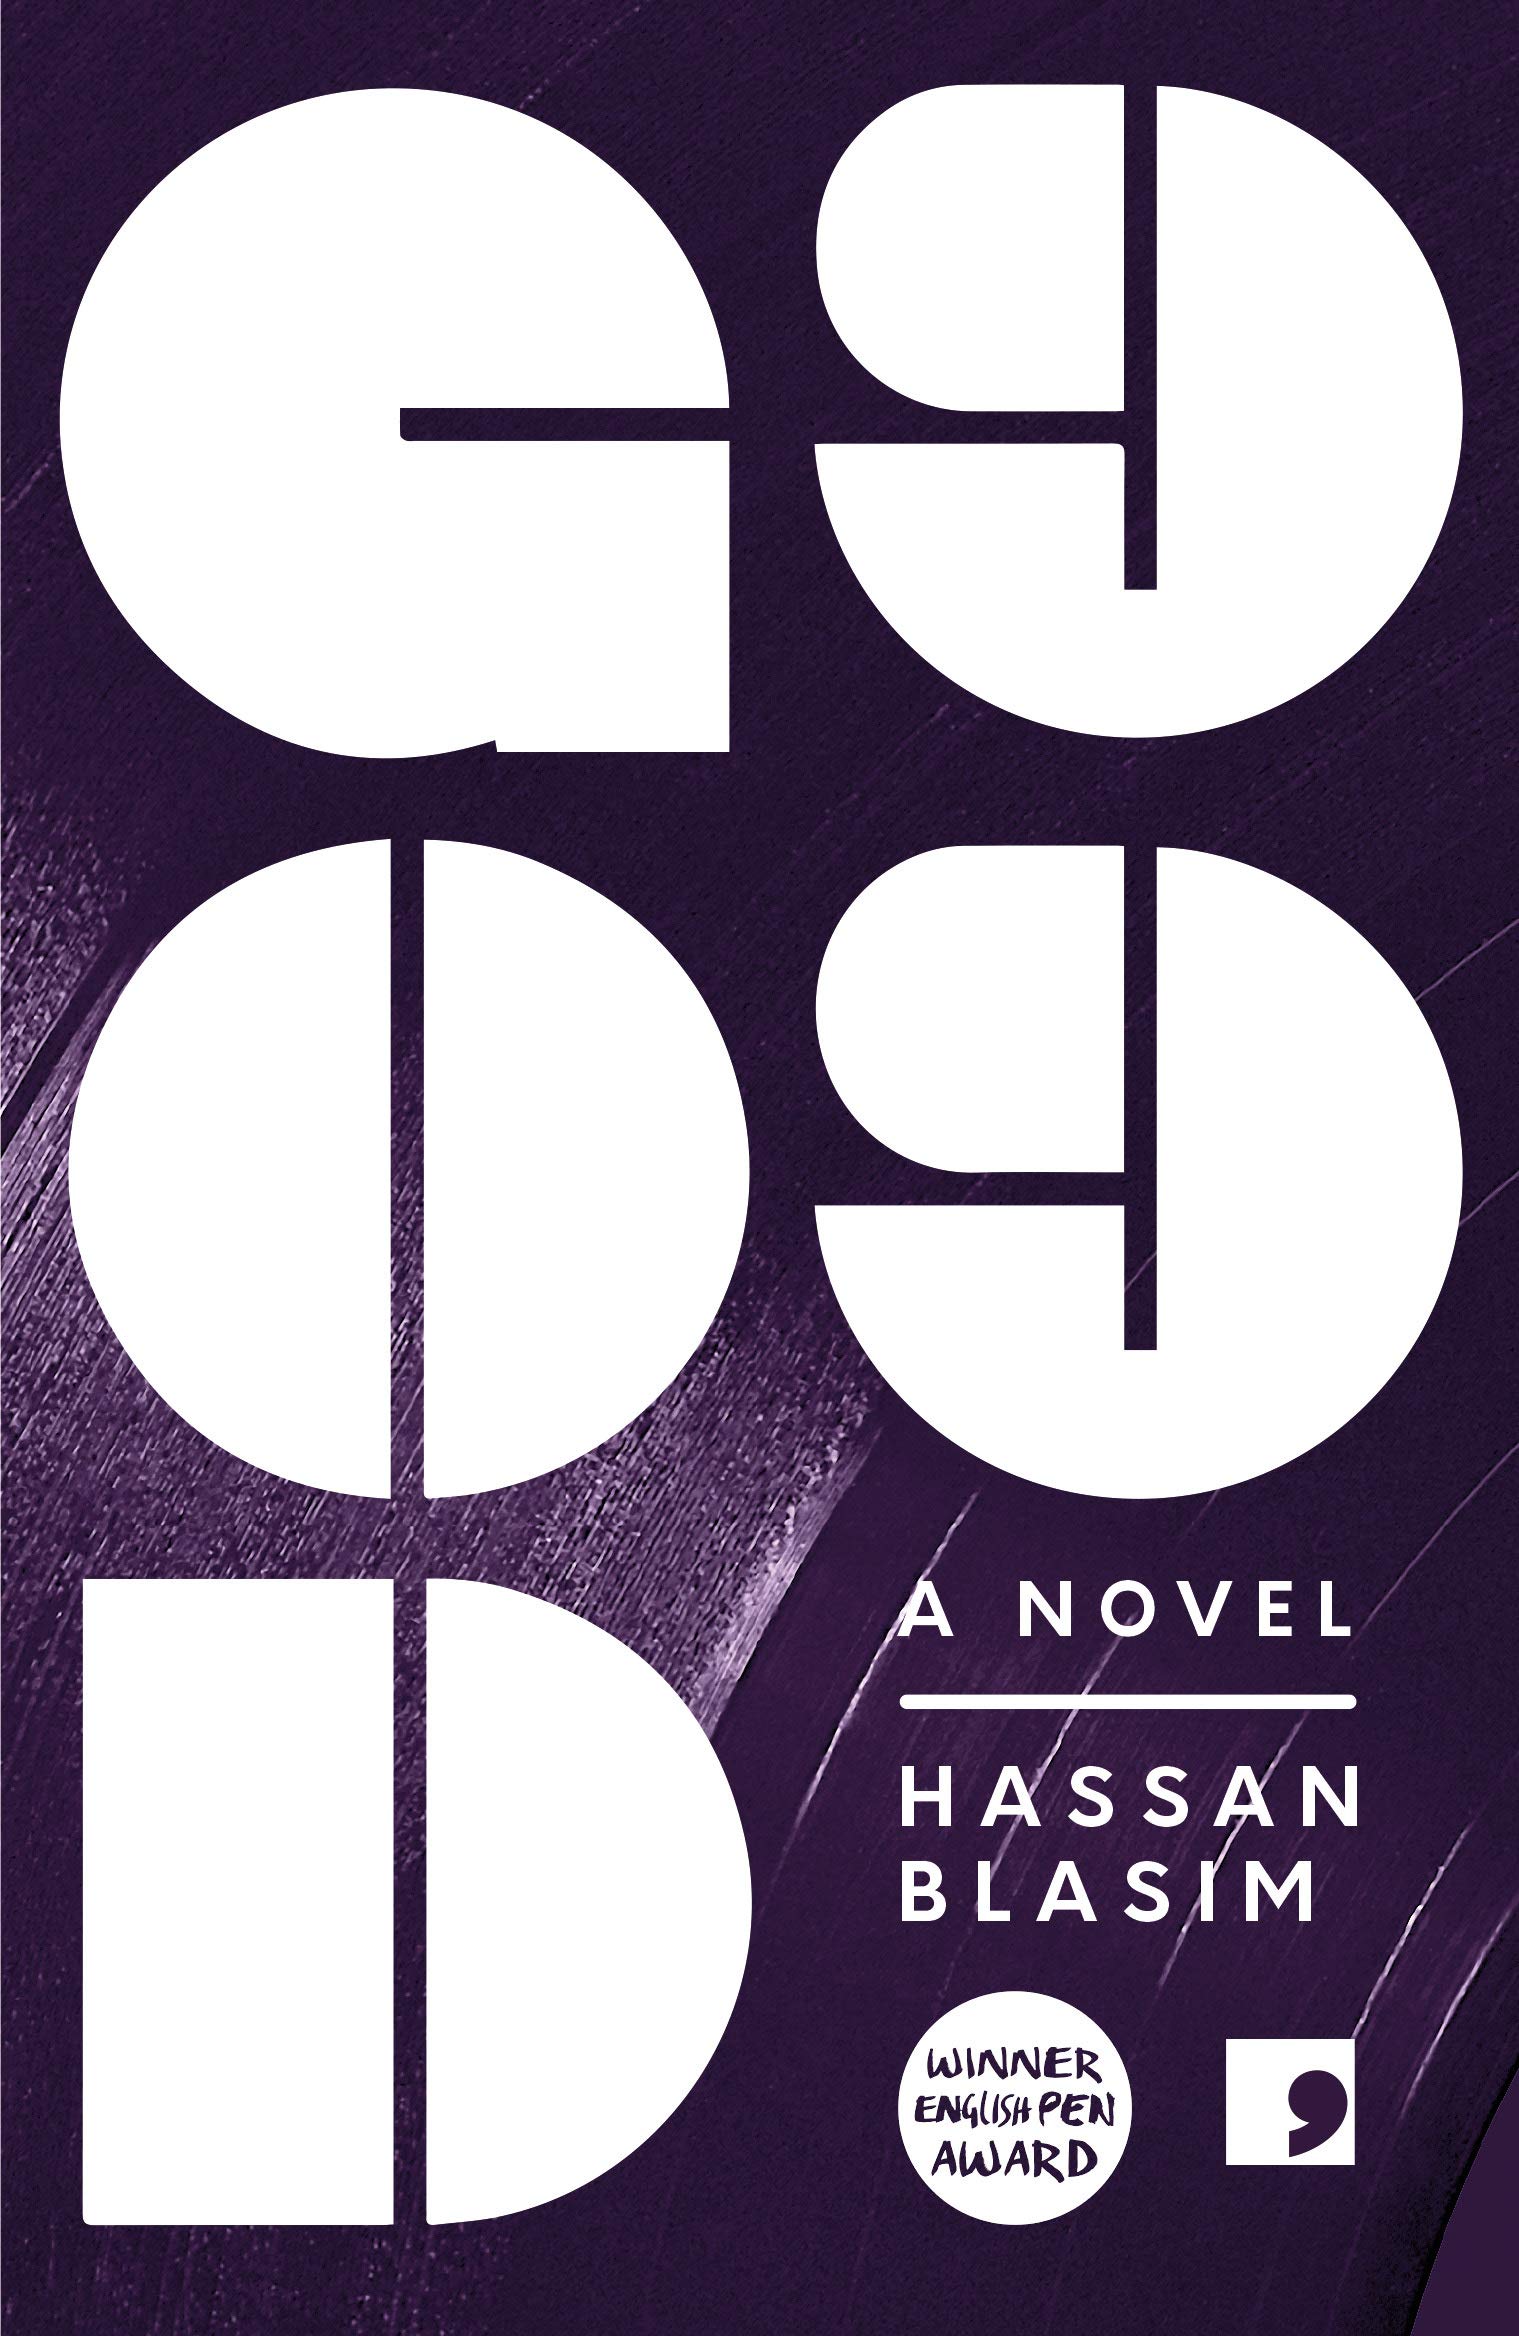 Cover of Hassan Blasim's "God99" (published by Comma Press)